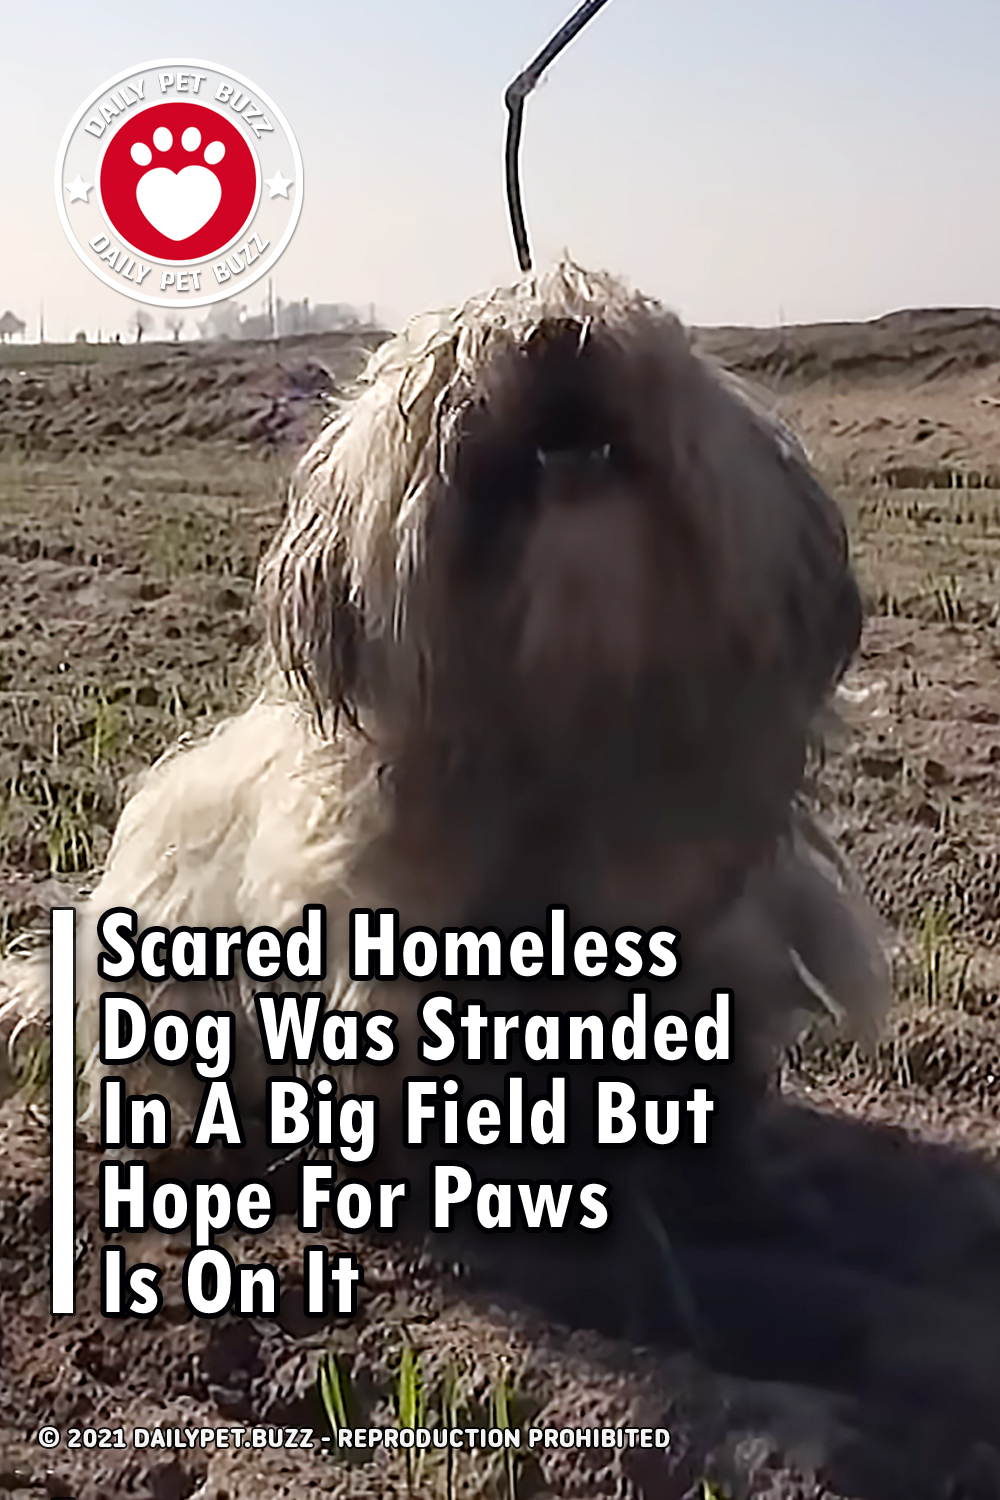 Scared Homeless Dog Was Stranded In A Big Field But Hope For Paws Is On It